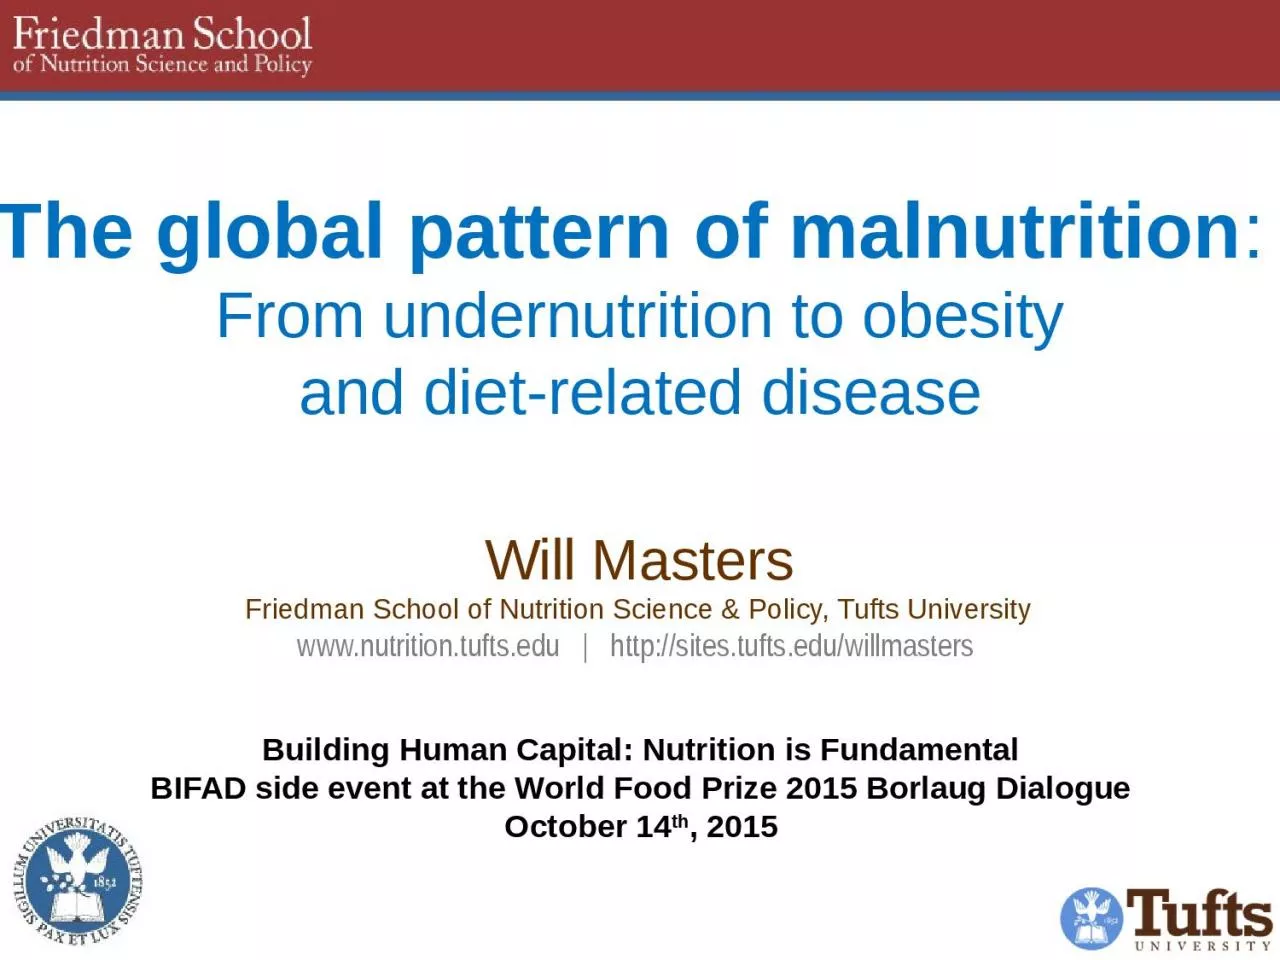 The global pattern of malnutrition